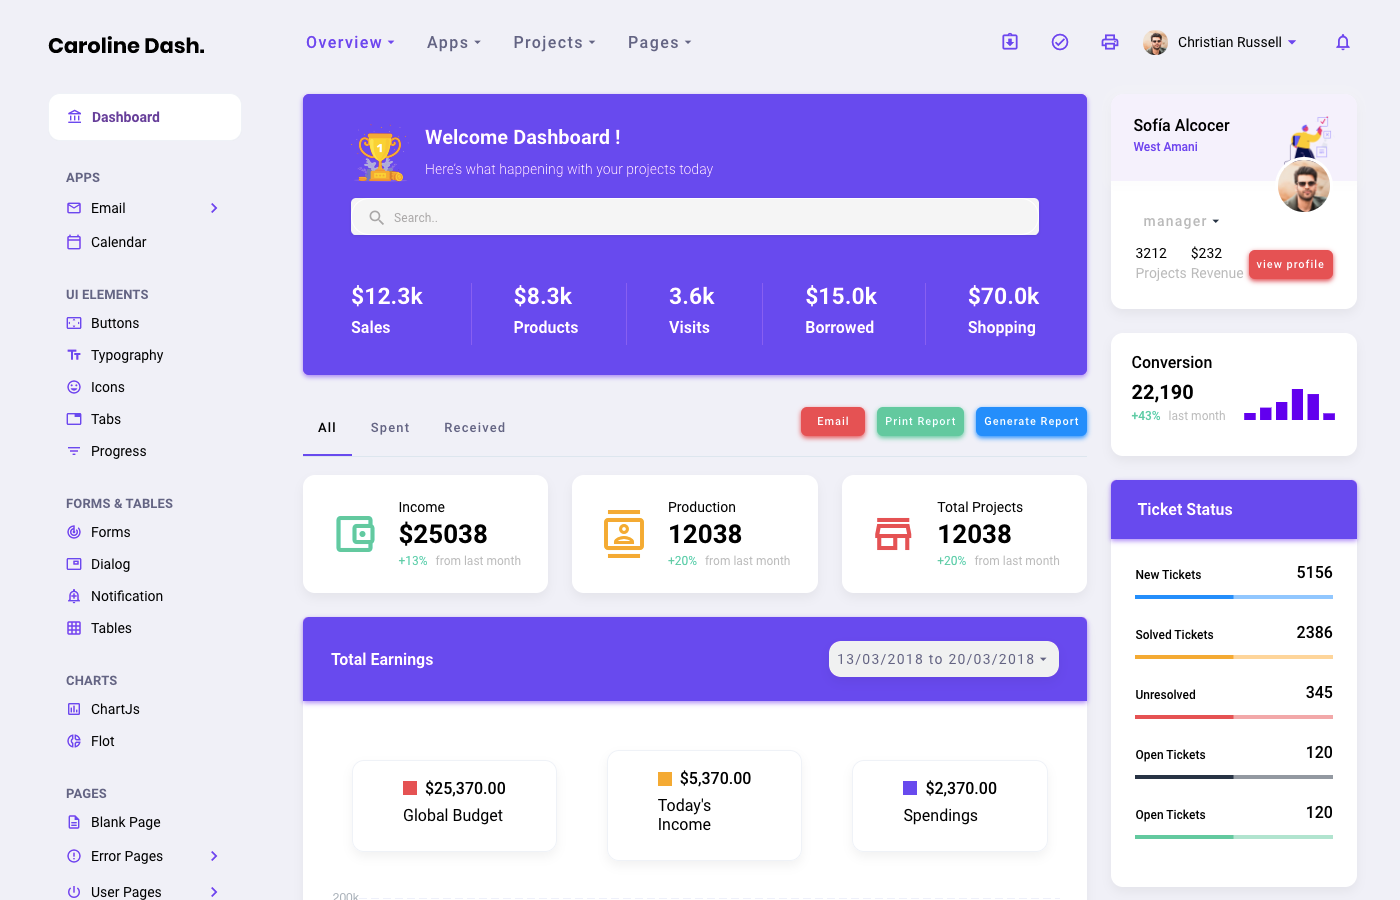 Caroline Dash is one of the best material design dashboards